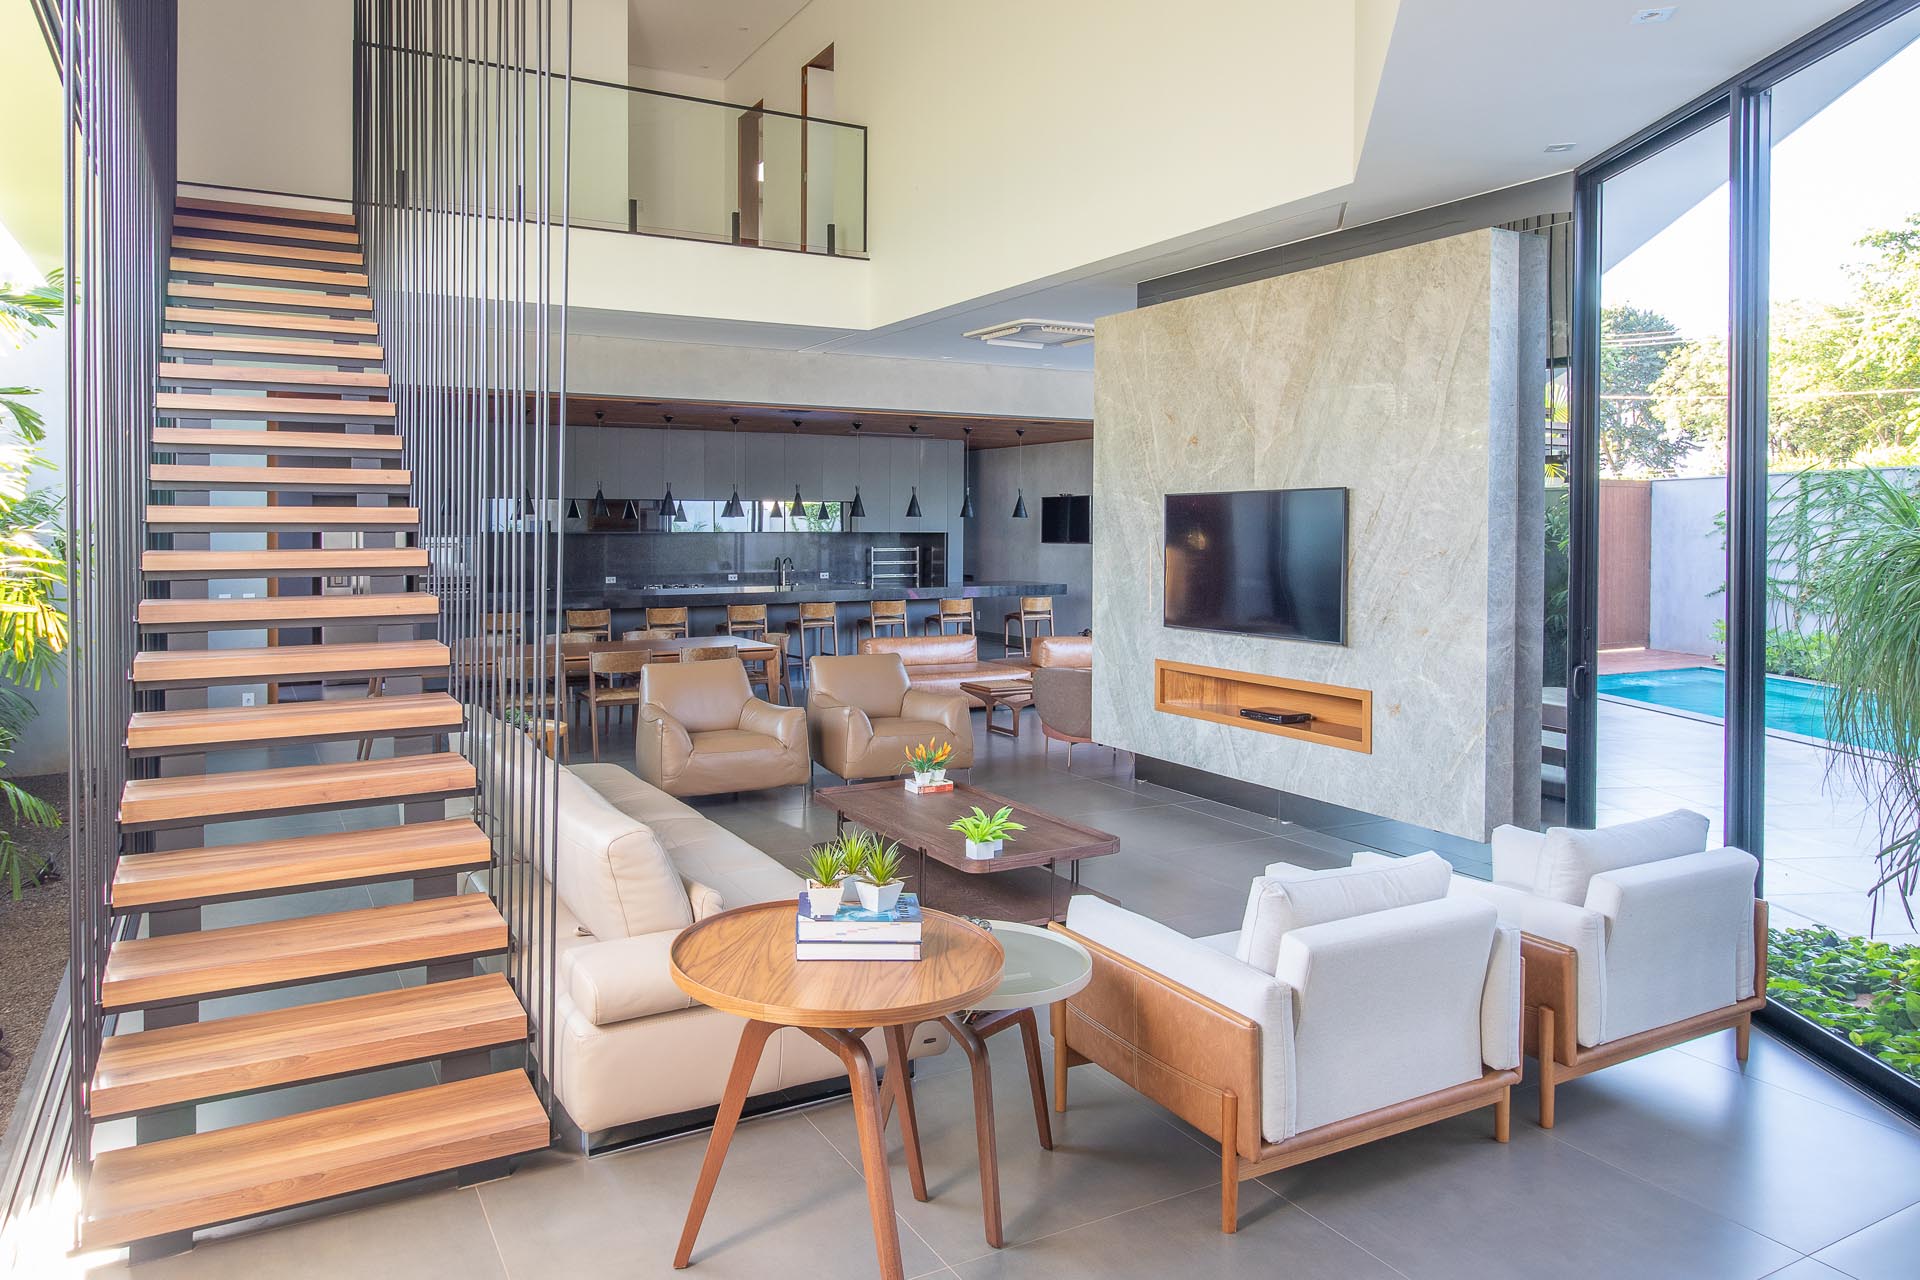 This mdoern living room is flooded with natural light from the oversized windows and sliding doors, while the stairs draw attention to the double height ceiling.